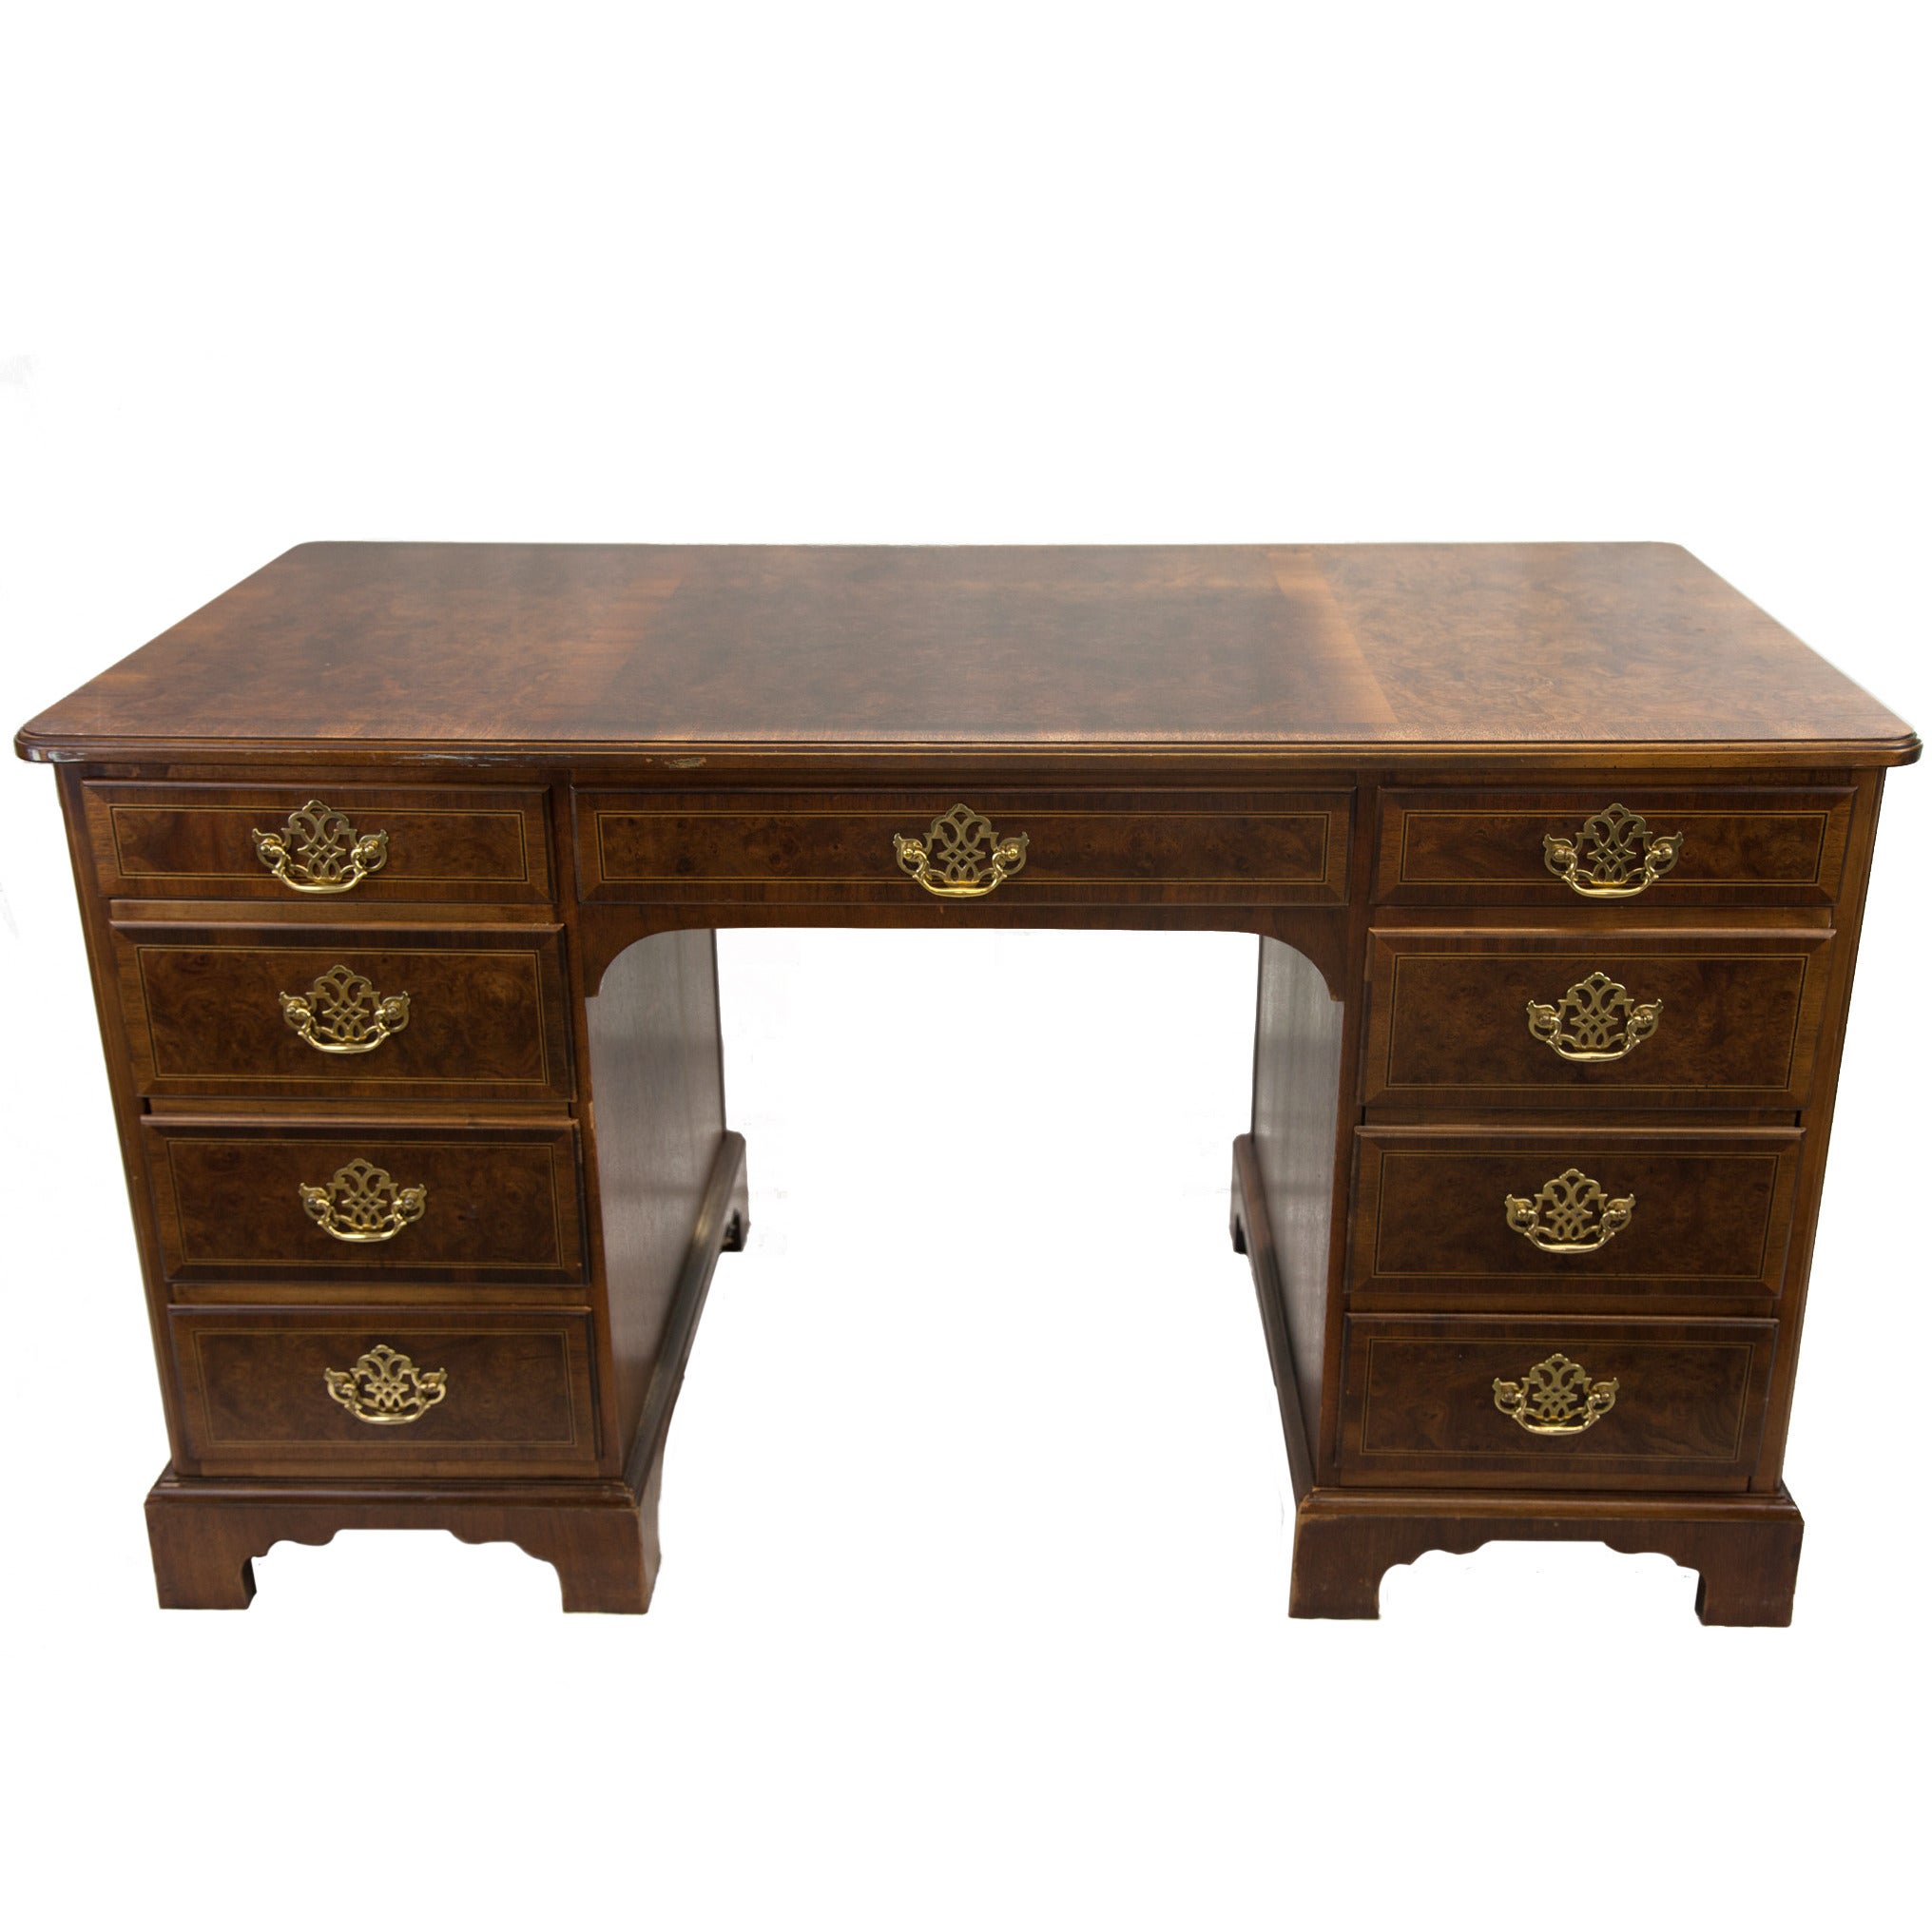 Burled Inlaid English Kneehole Desk For Sale